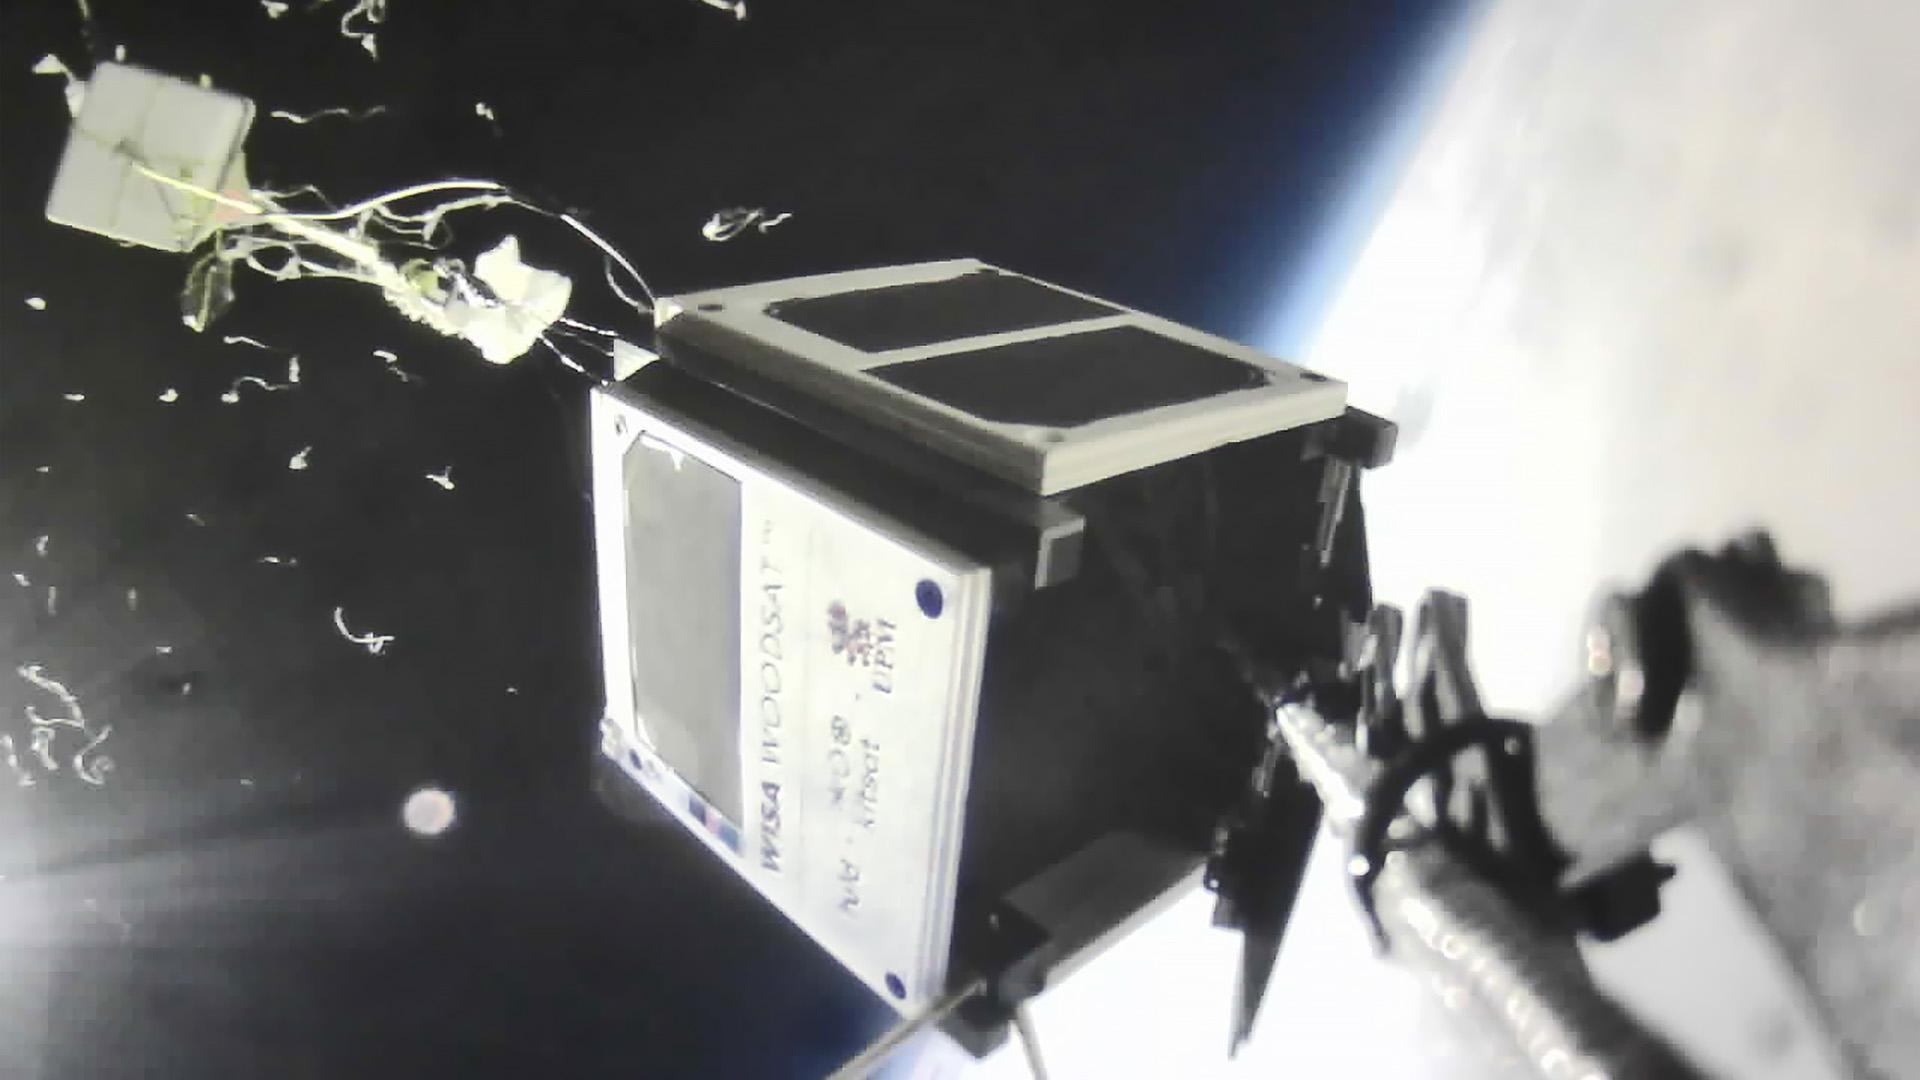 Image taken by the satellite camera during the last stratospheric flight in last summer.